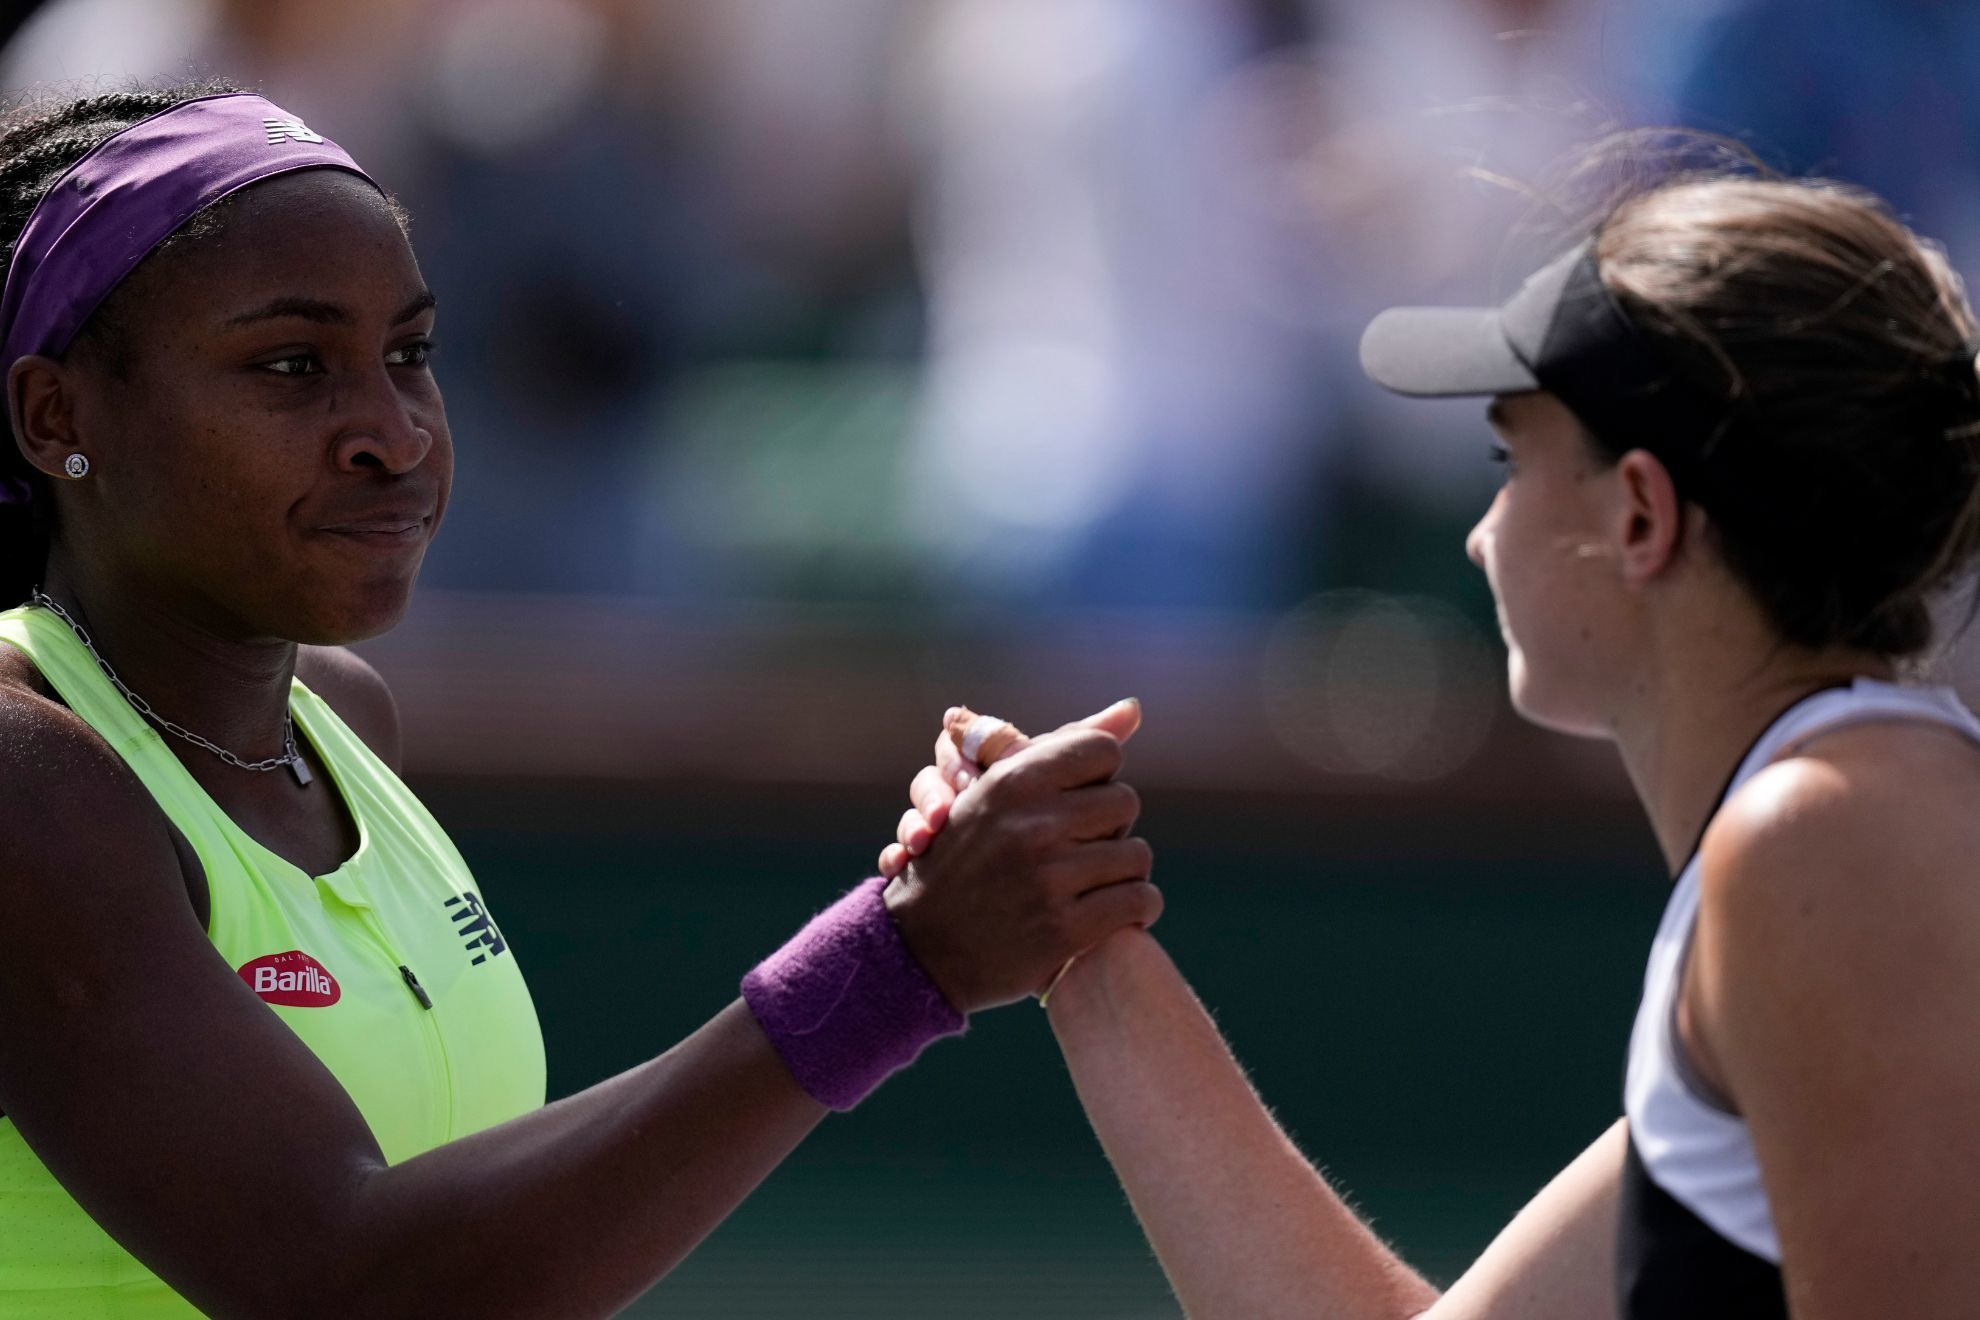 Coco Gauff was shocked when told about record she had just set at Indian Wells